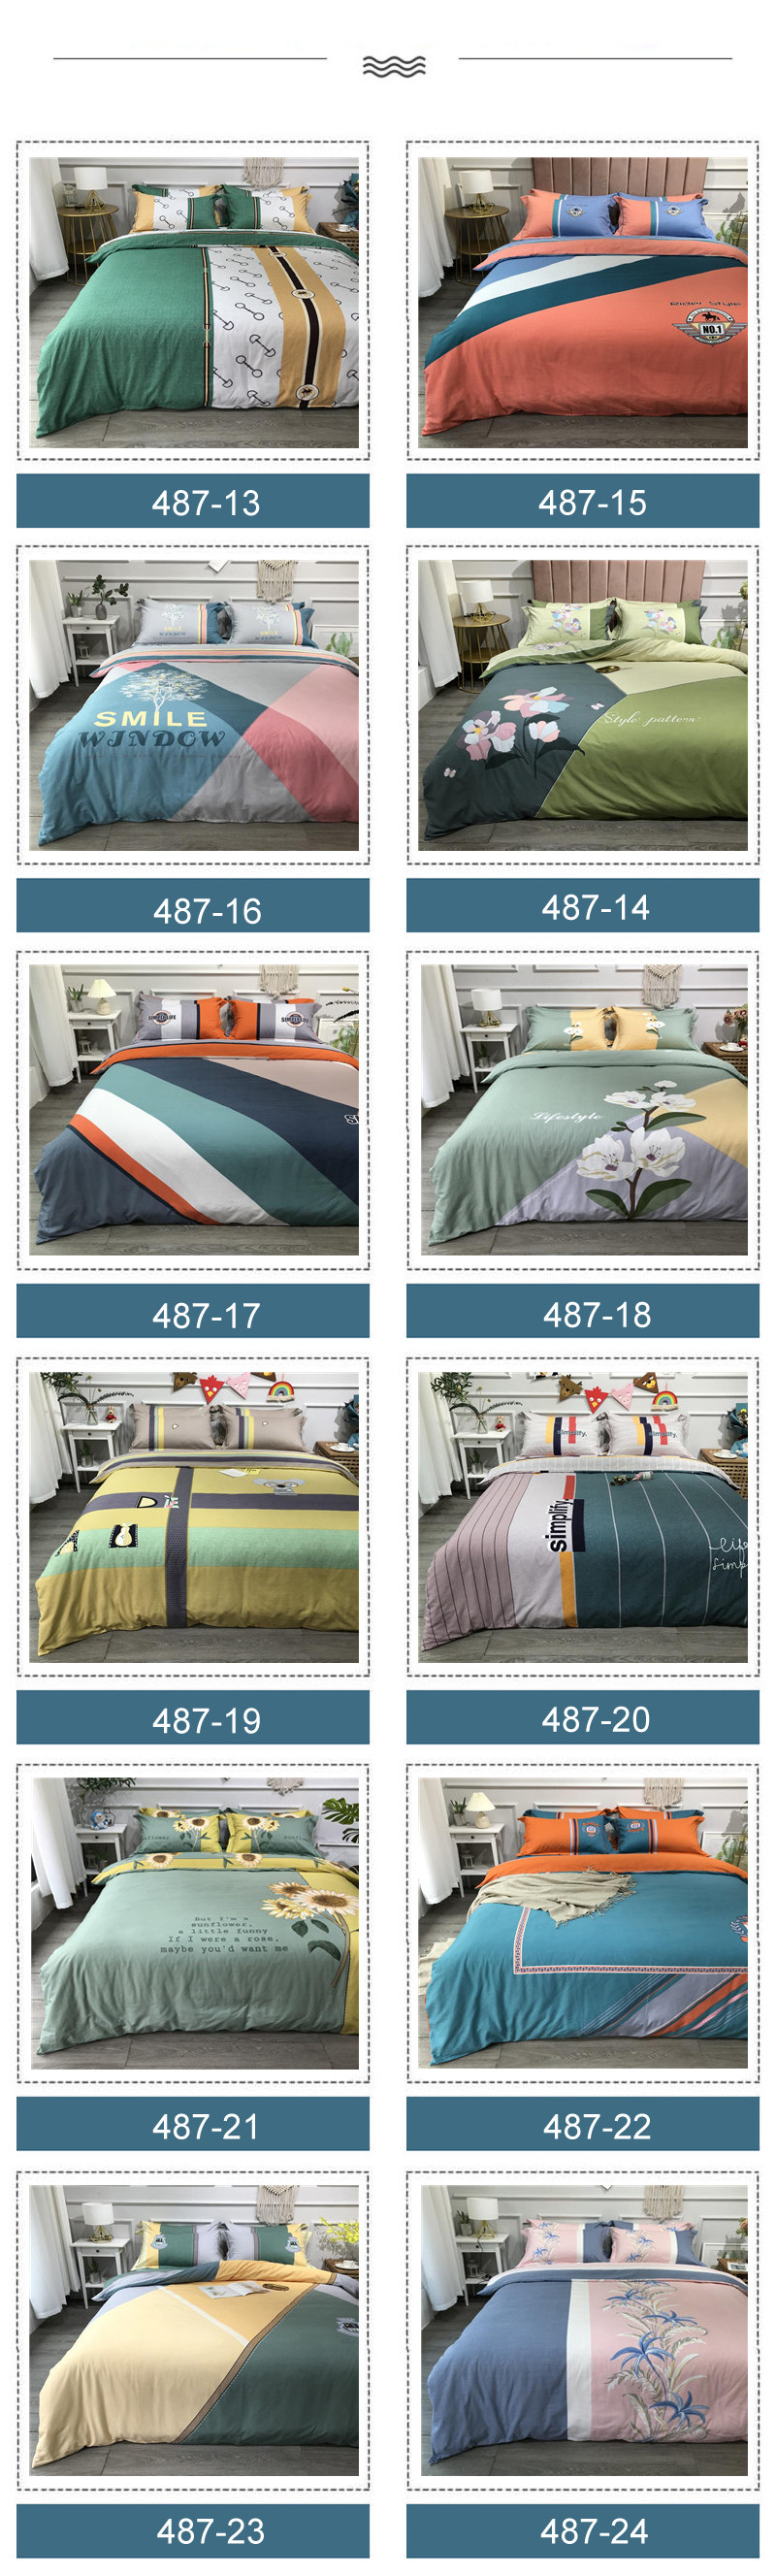 Home Cotton Bed Linens